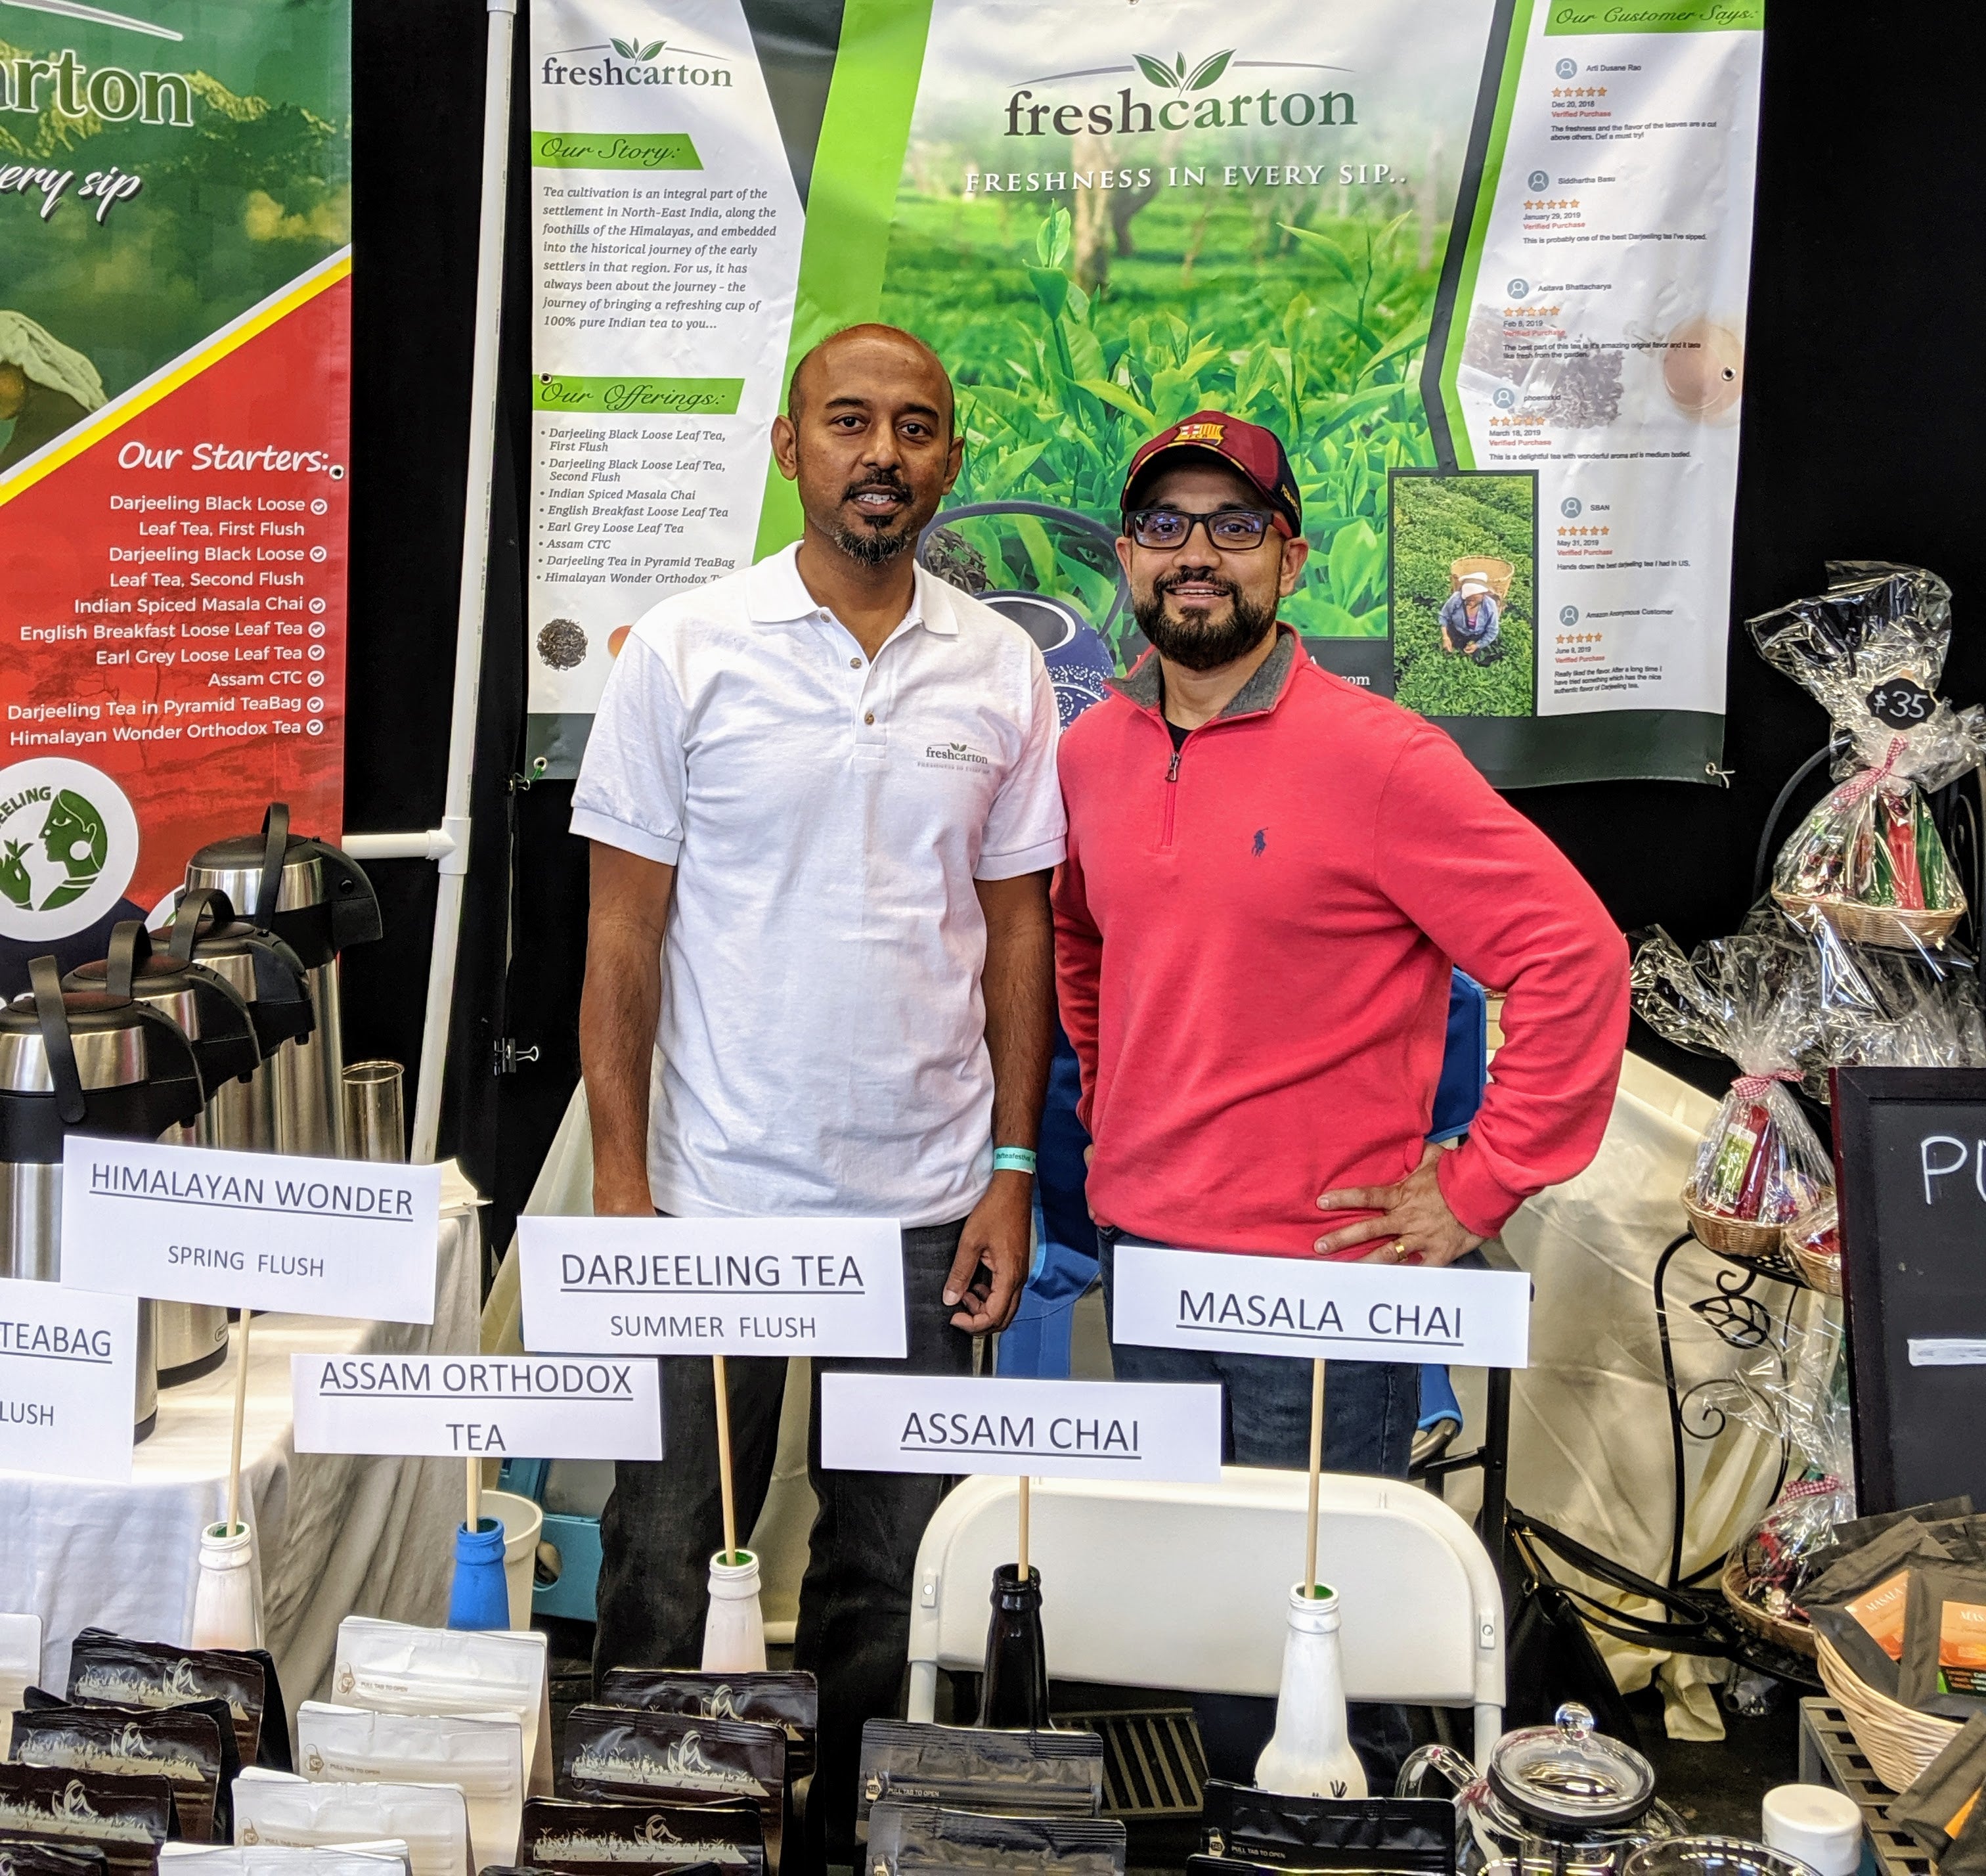 Our founders, Das and Dipan at the San Francisco Tea Festival at the Freshcarton stall!